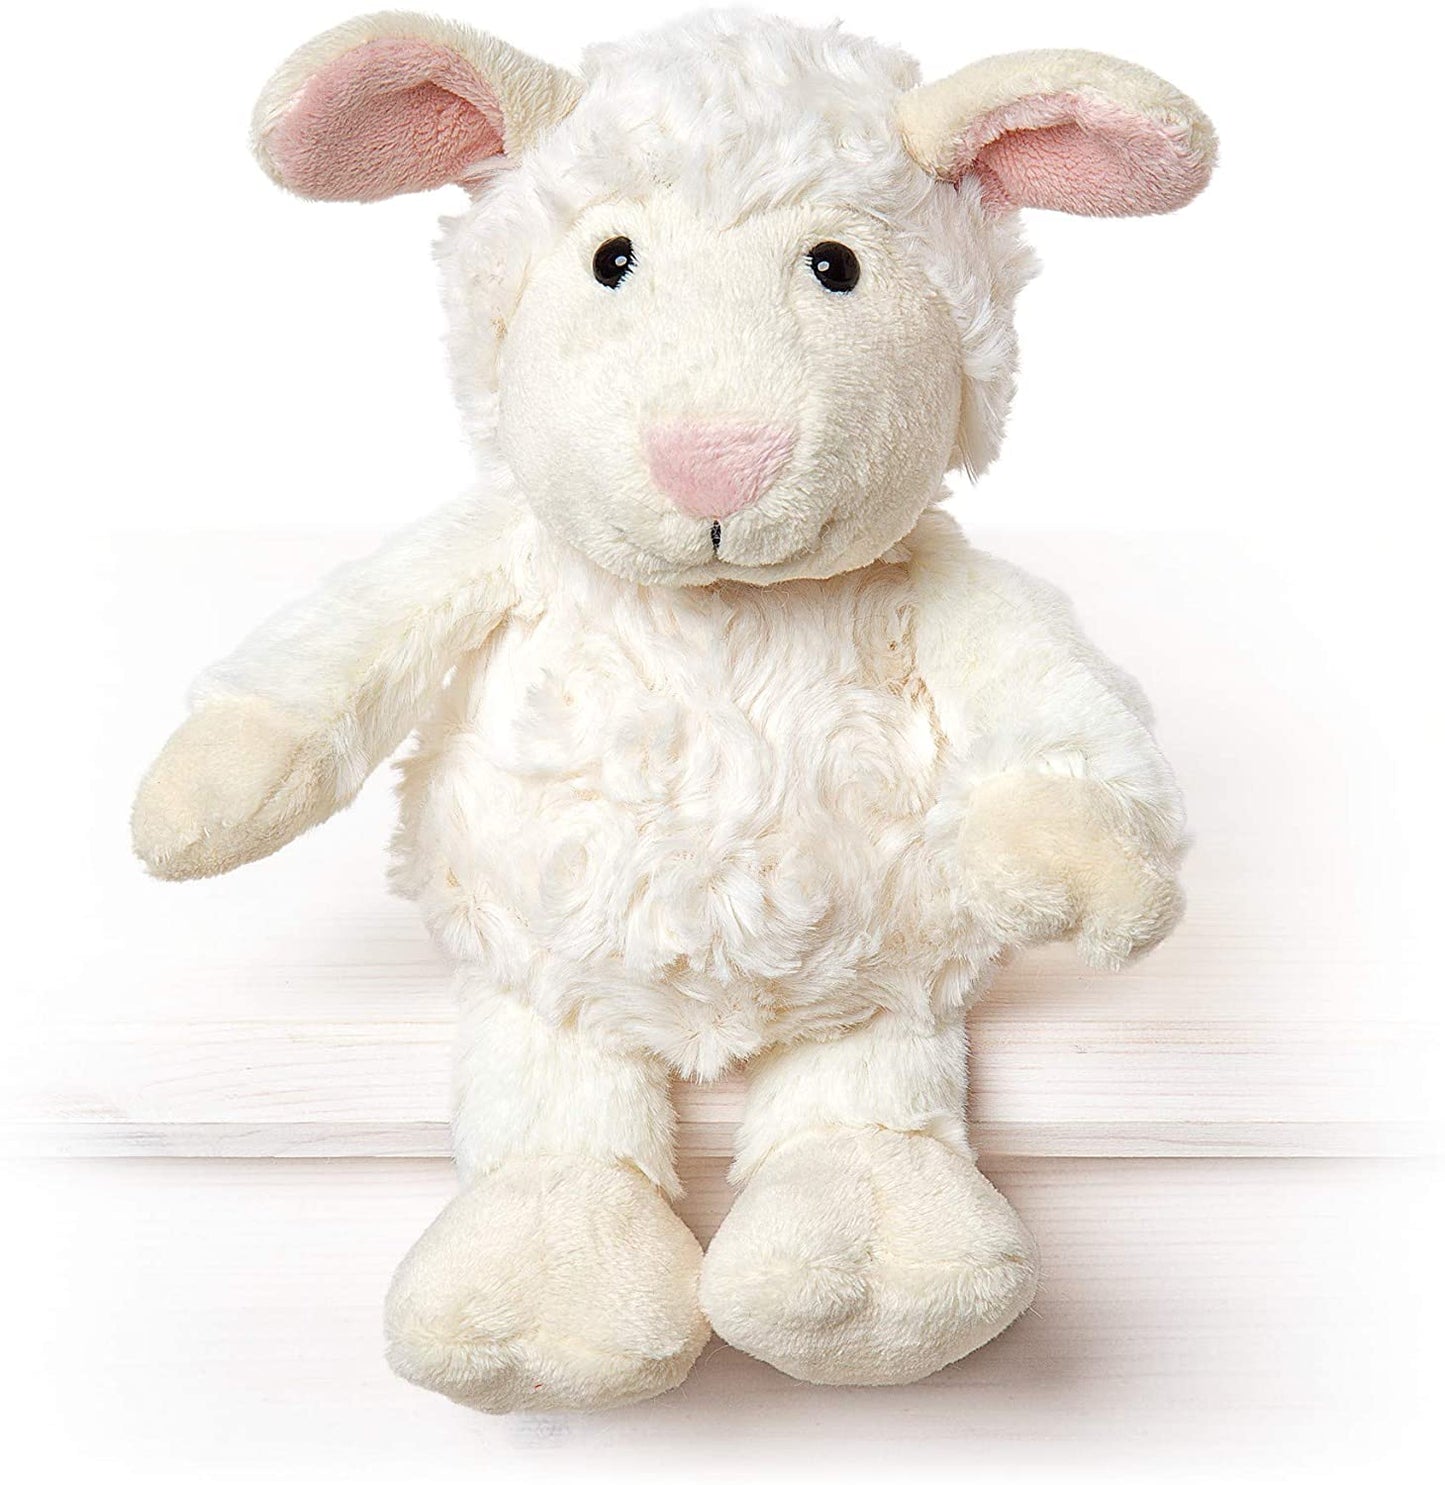 All Creatures Tilly the Sheep Soft Toy (Medium)